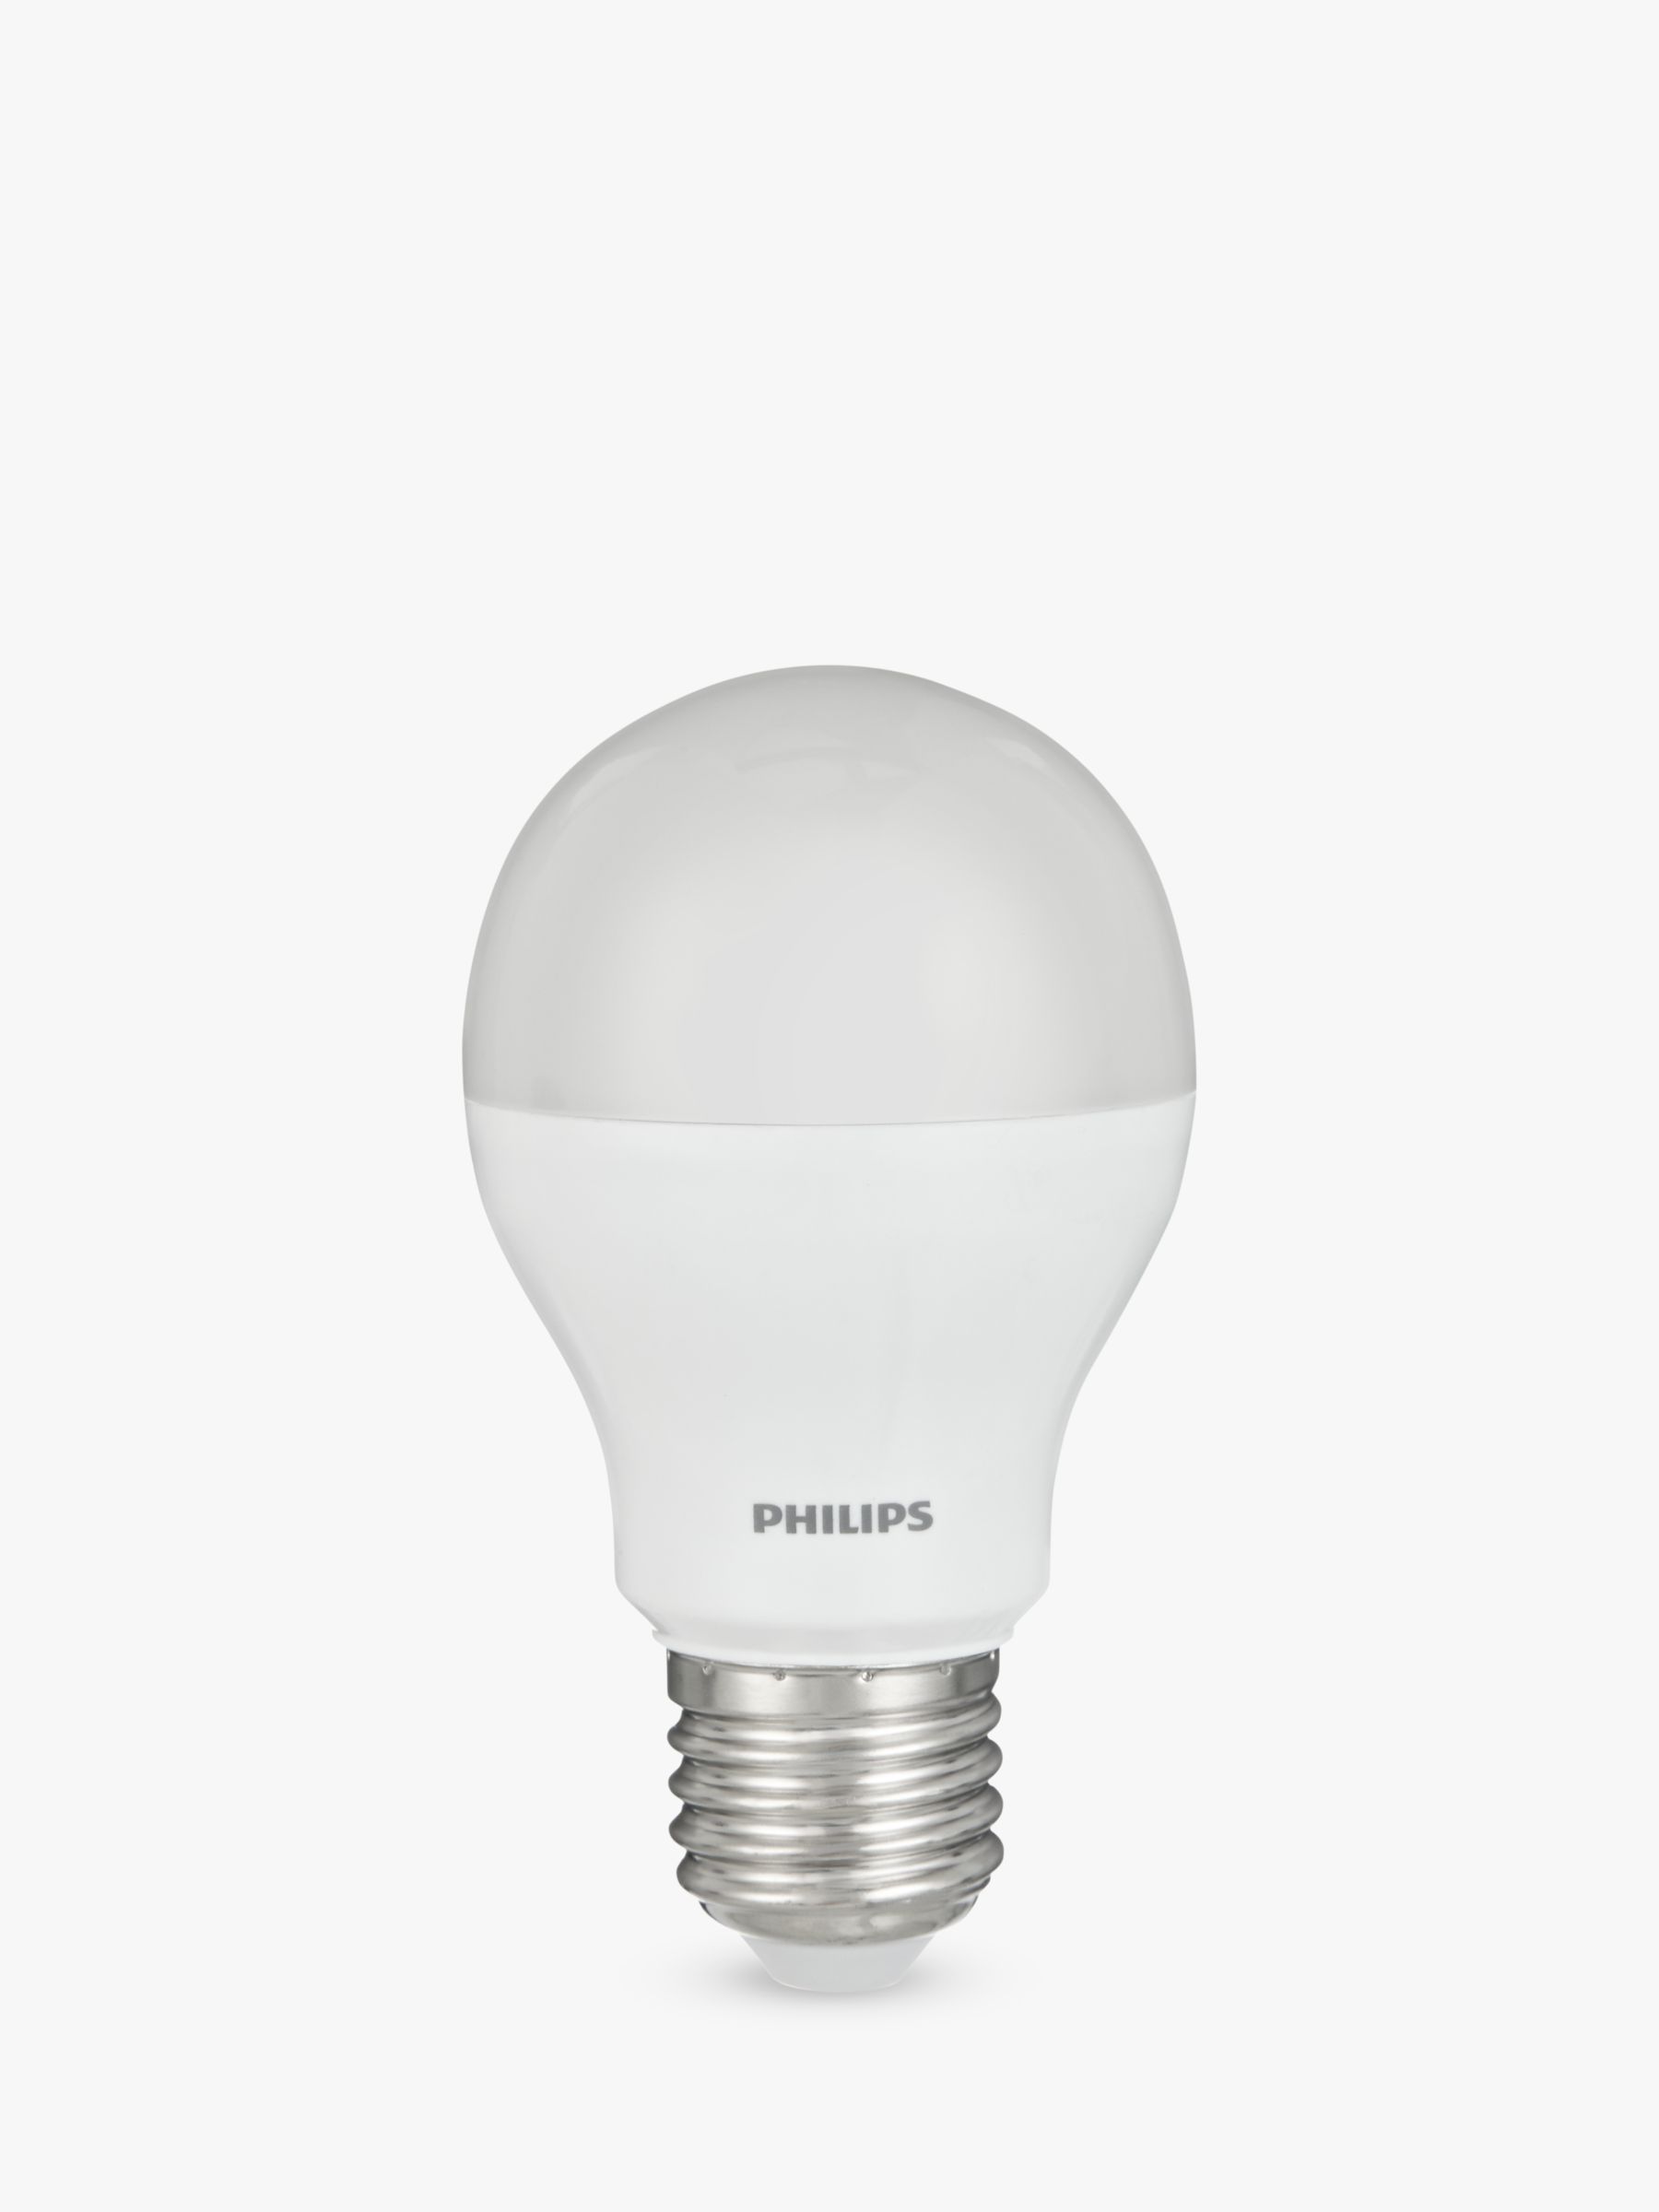 Photo of Philips 8w es led classic light bulb frosted